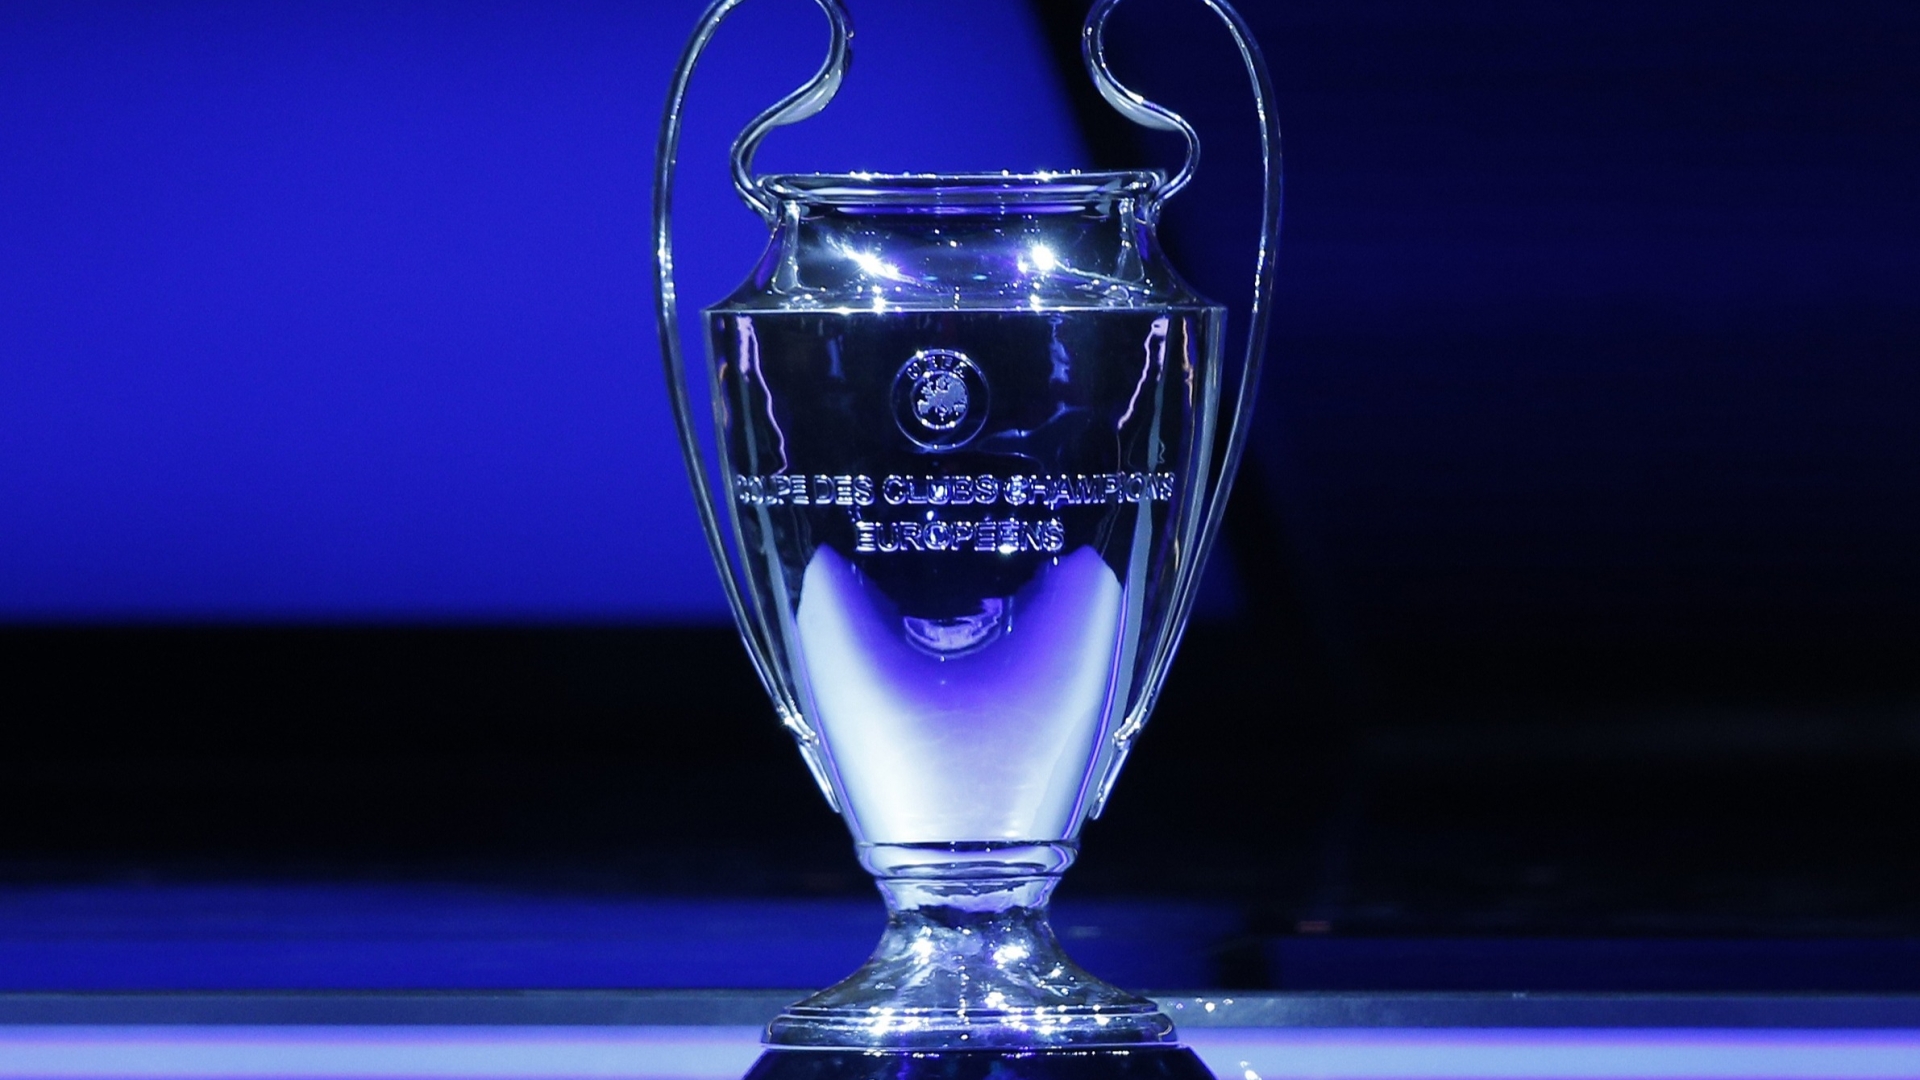 When is the Champions League final? Date, kick-off time and latest news